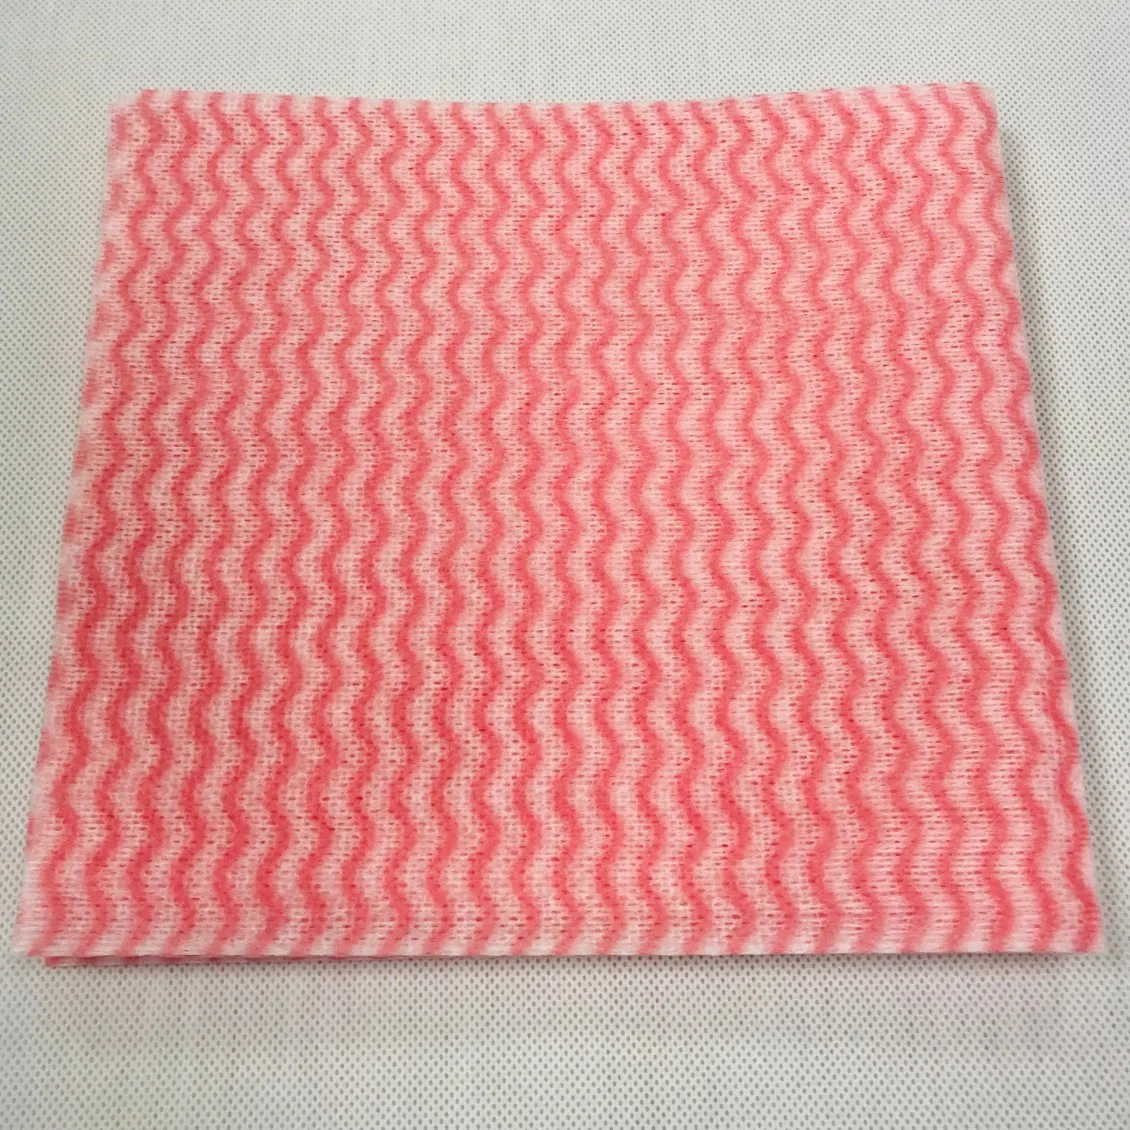 Printed Disposable Kitchen Clean Dish Cloth Spunlace Nonwoven Polyester Viscose Embossed Spunlace Nonwoven Fabric for Wet Wipes